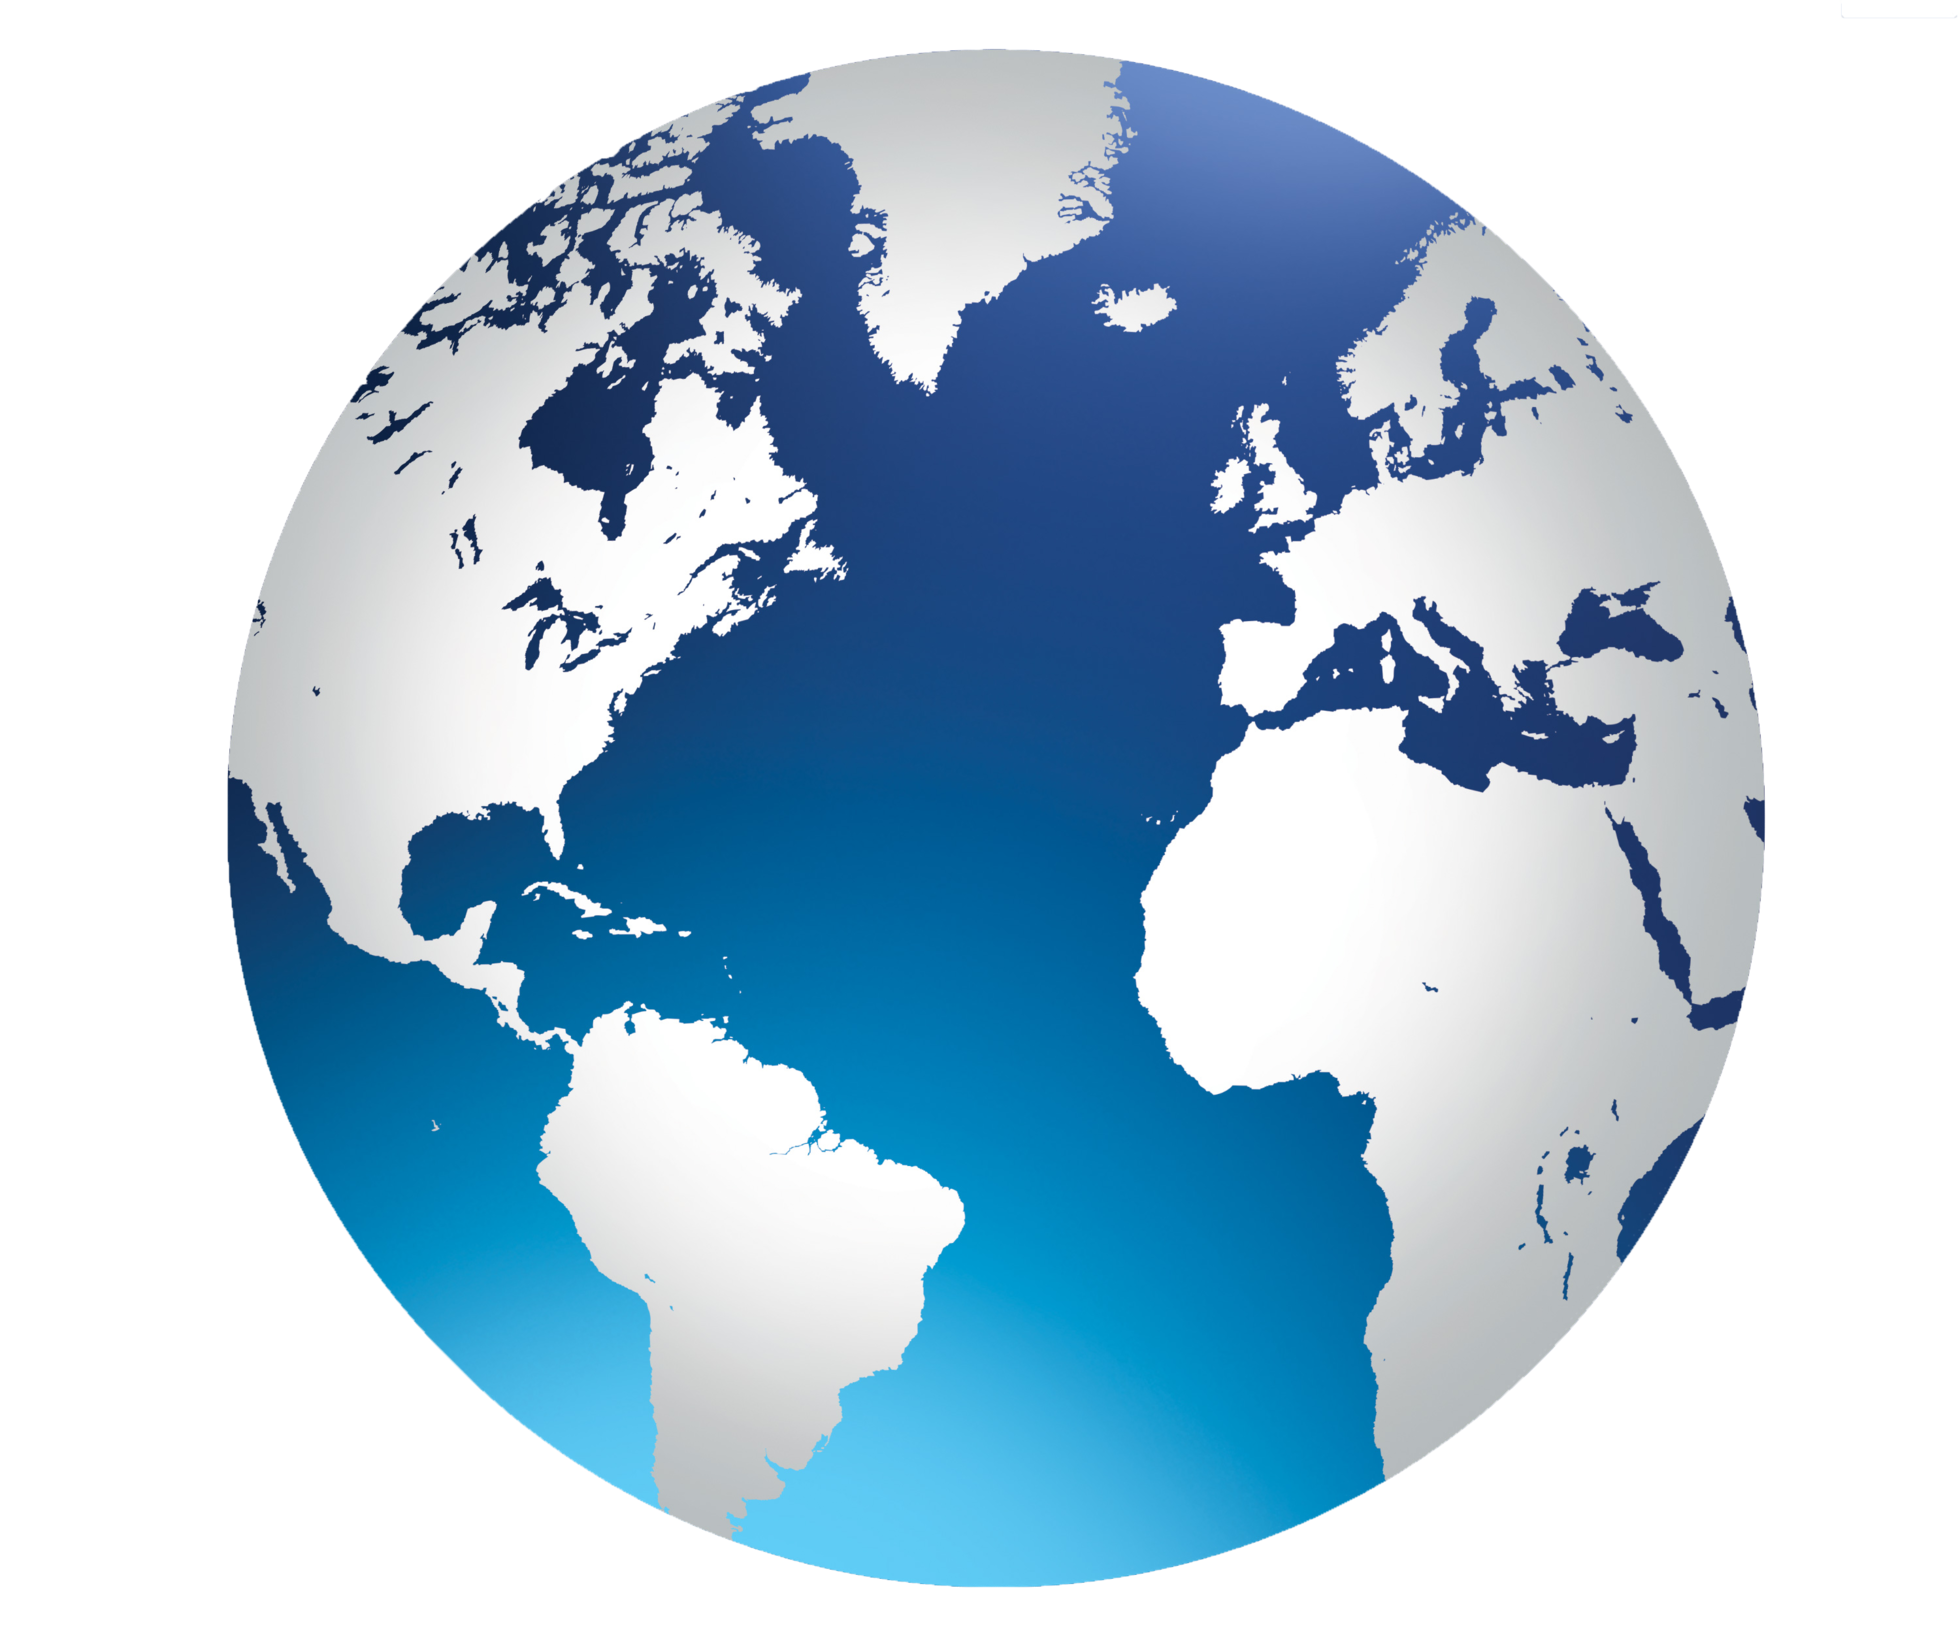 Download Earth Globe Image Free Clipart HQ HQ PNG Image.